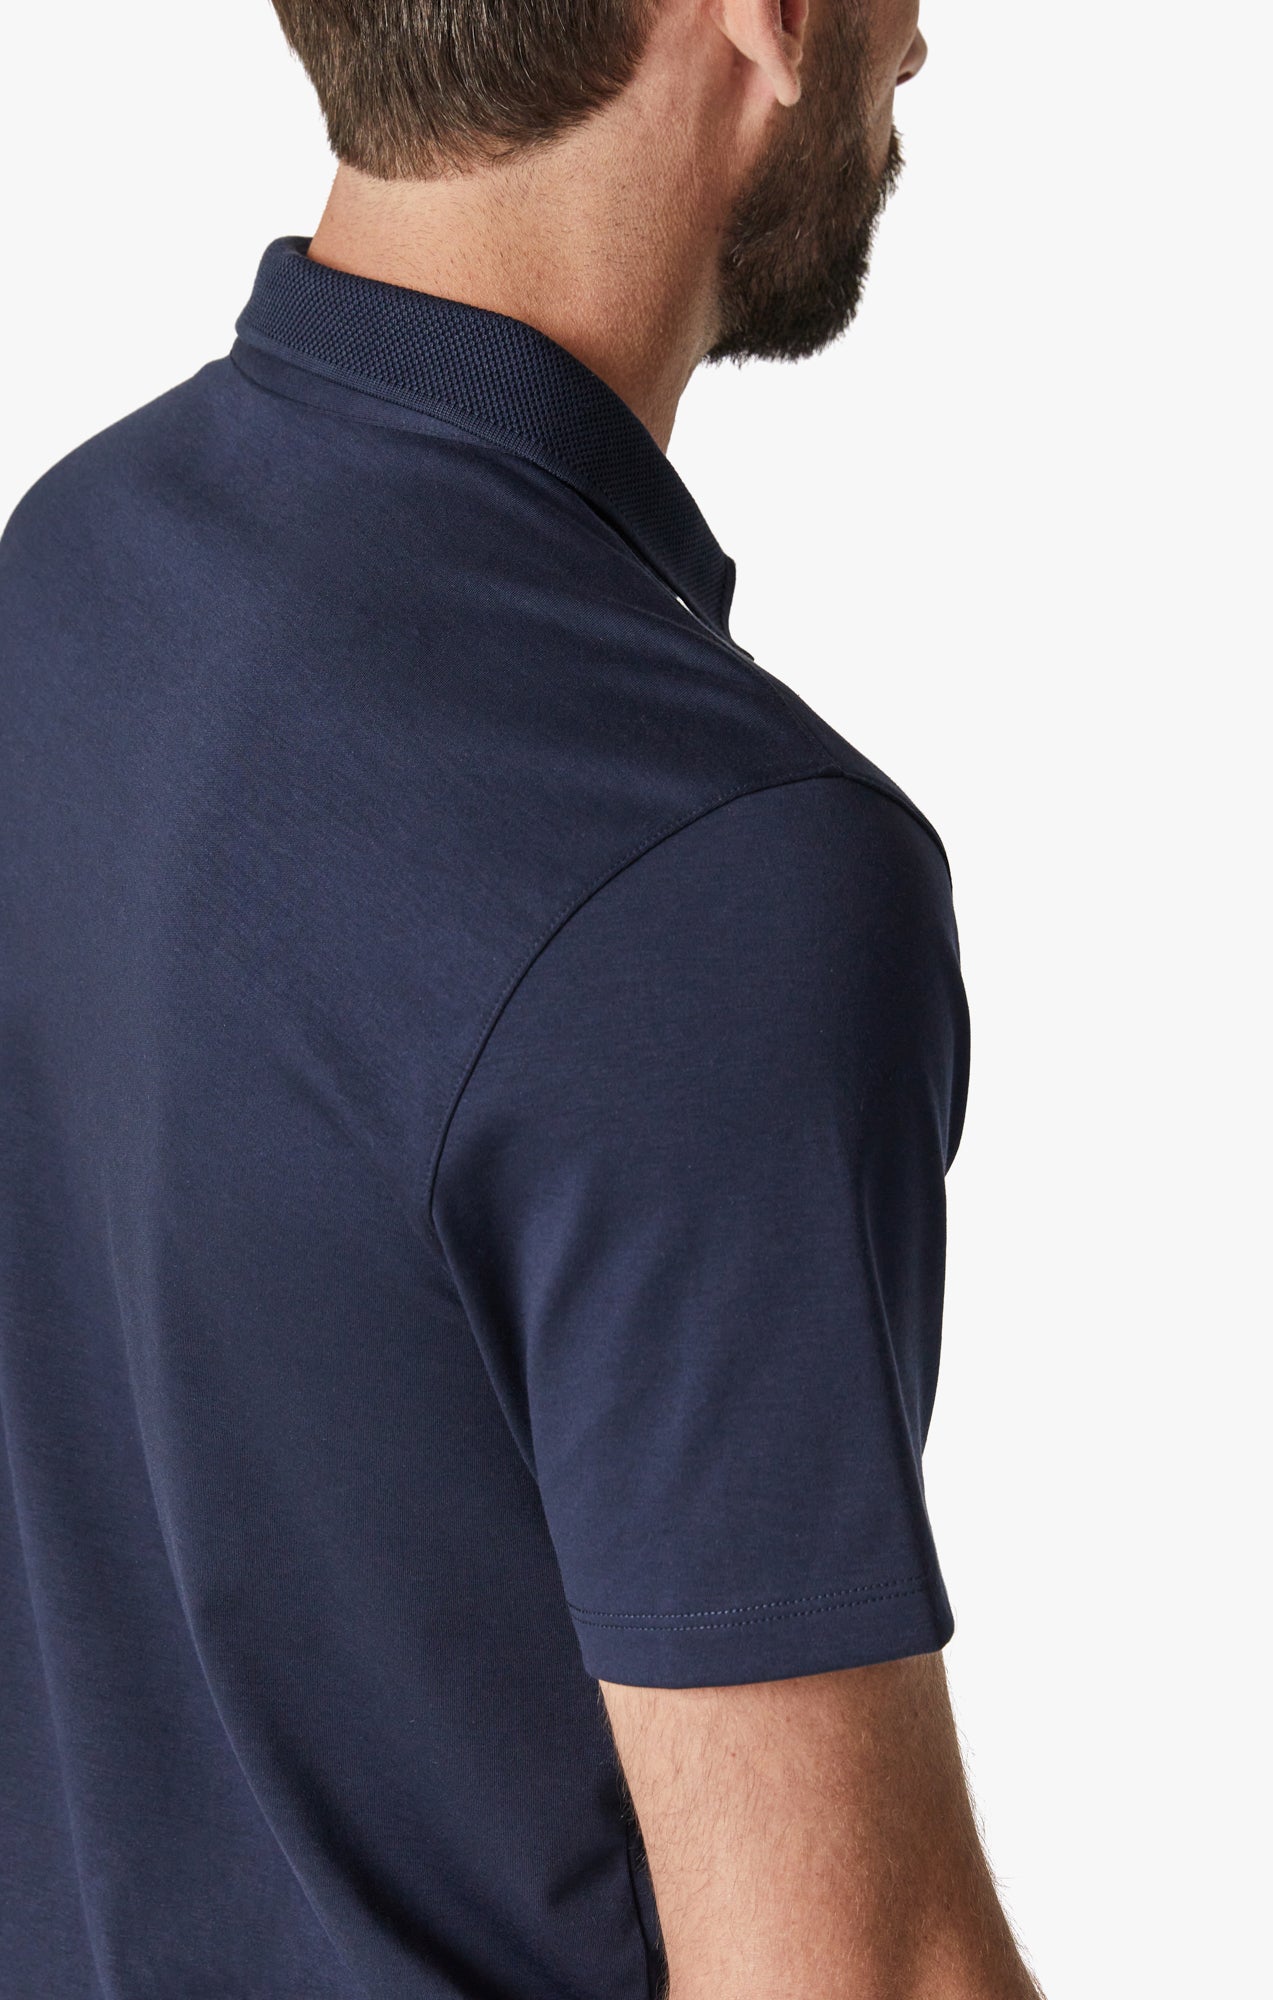 Polo T-Shirt In Navy Image 6